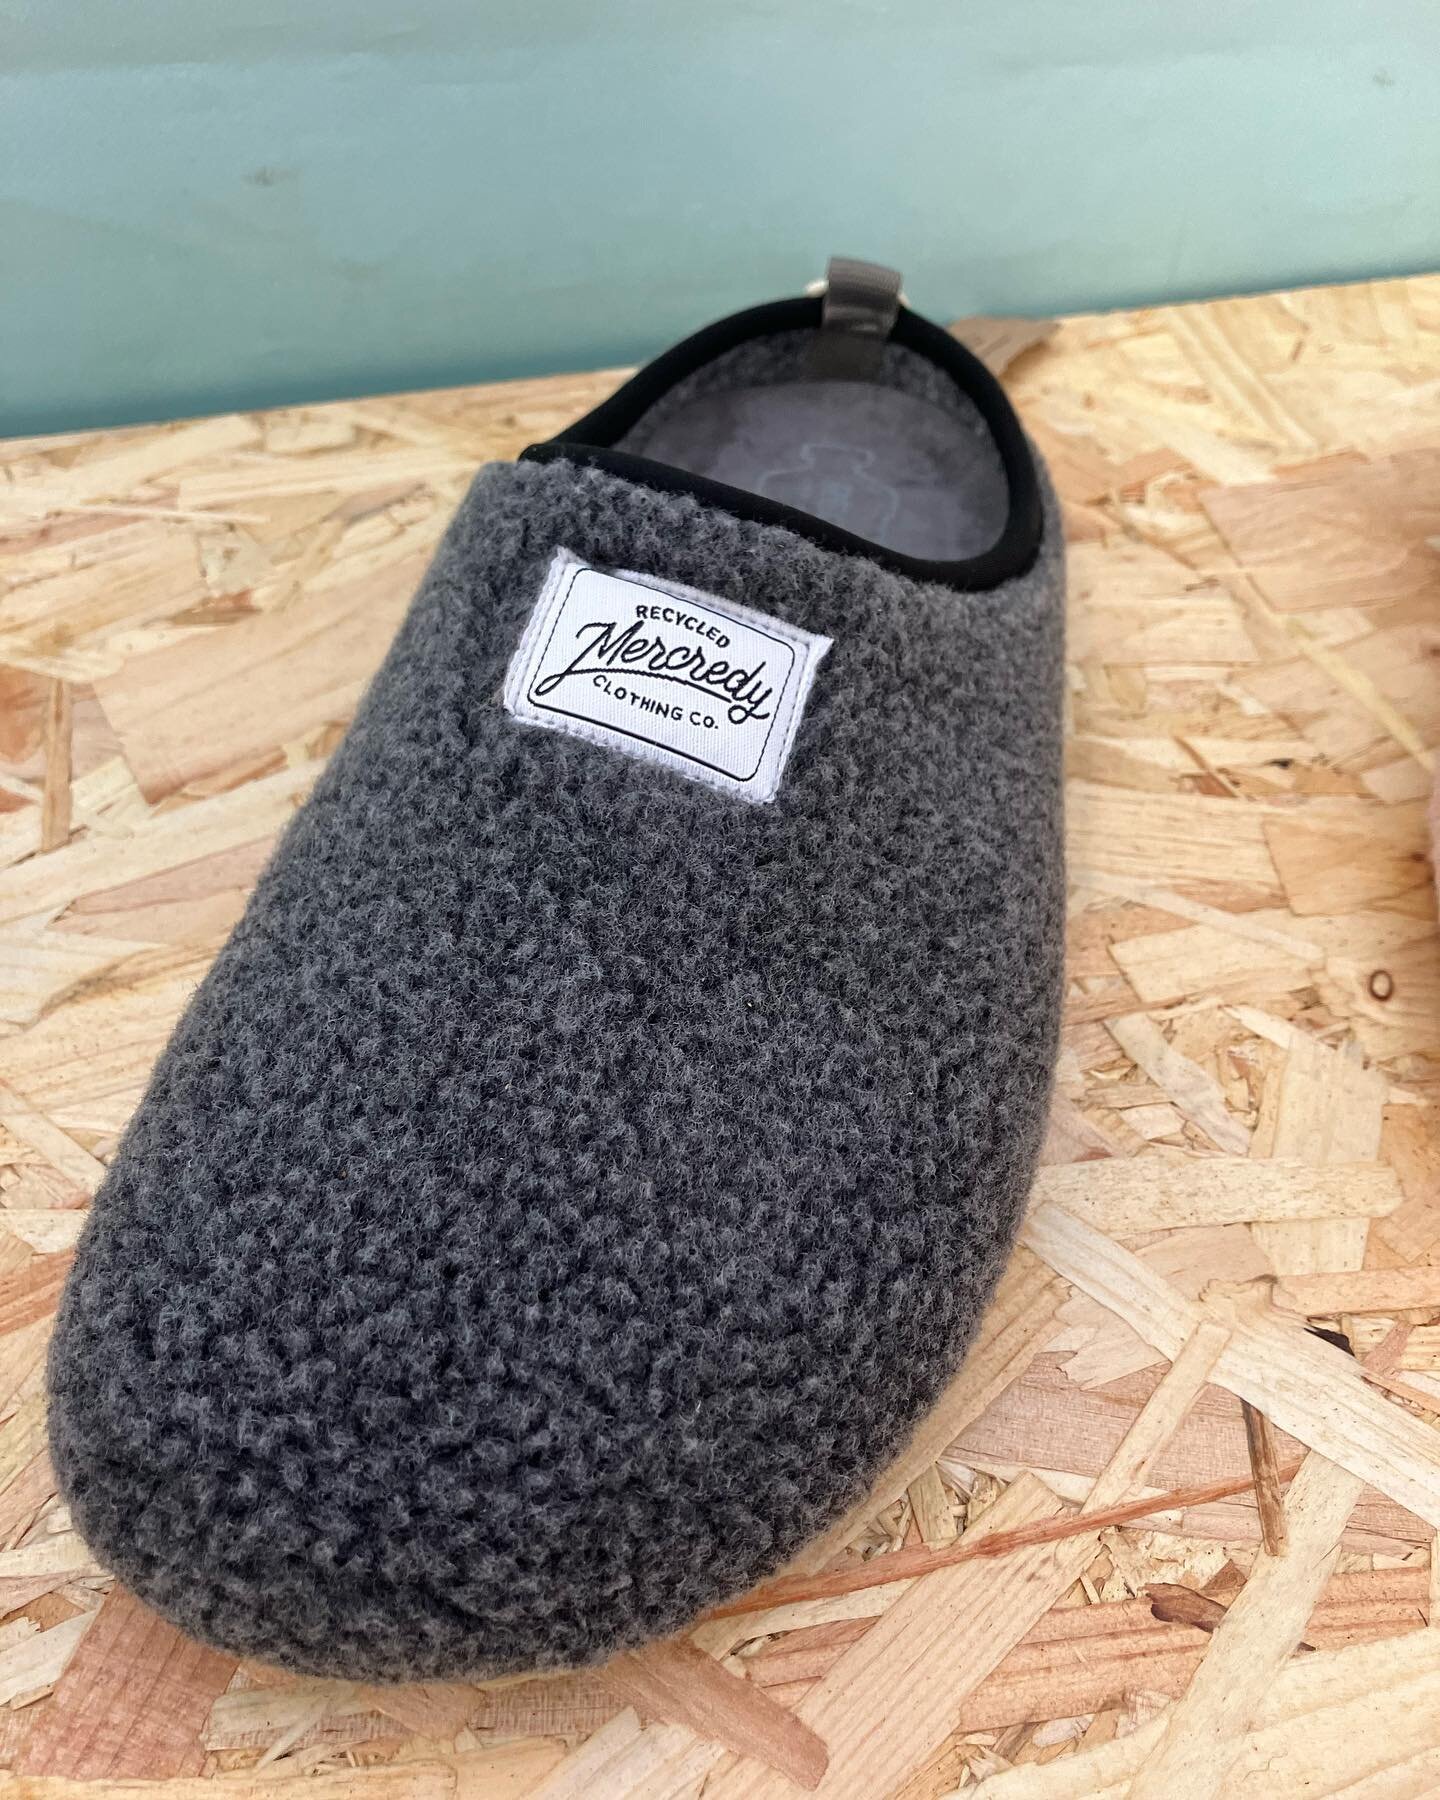 #Mercredy slippers from #Elche#Spain have added an even softer upper to their fully #Eco slippers#topdrawerlondon2022 stand 207. #northandsouthfootwear